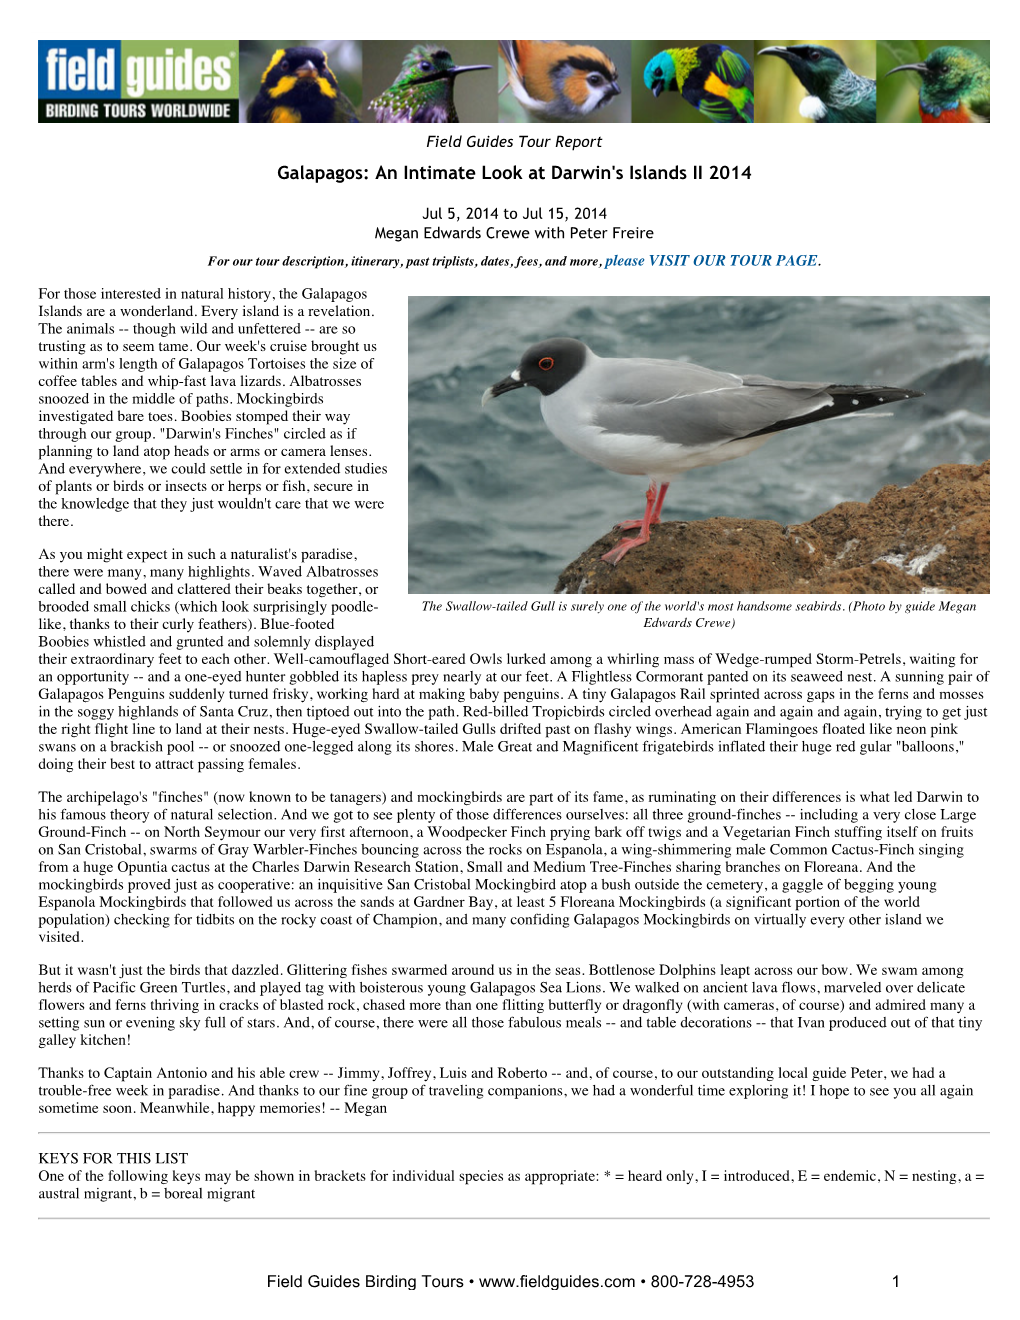 FIELD GUIDES BIRDING TOURS: Galapagos: an Intimate Look At